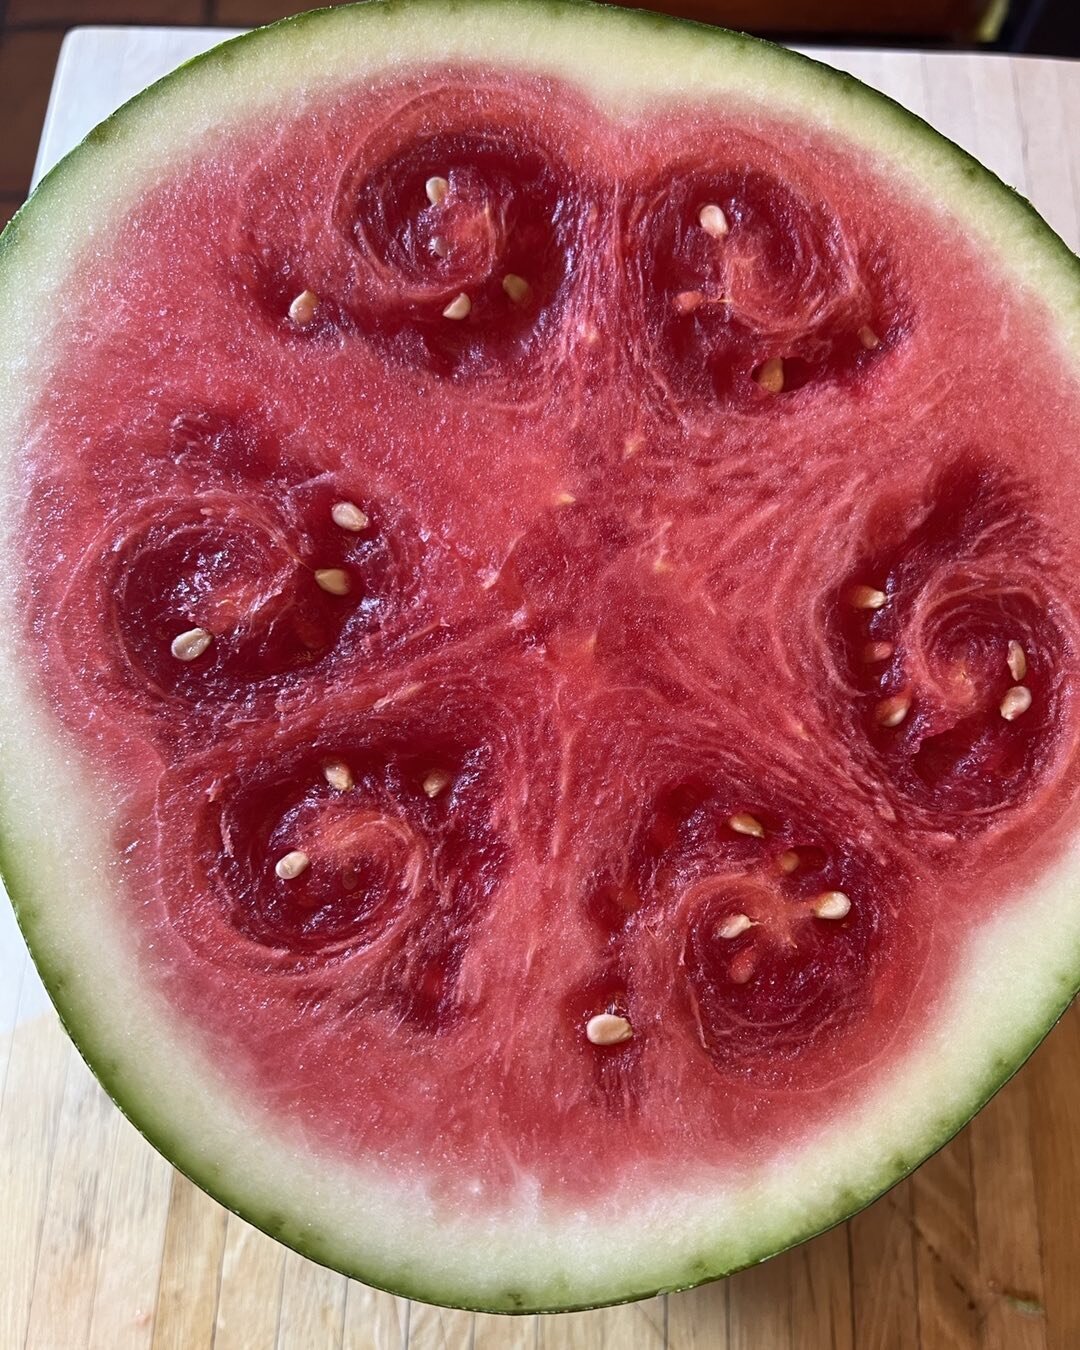 Degeneration in Spirals that Center a 6-pointed Star. The Splendor of an Aging Watermelon is Incomparable. Come join our new program on Regeneration and explore the beauty and meaning of degeneration in our lives, and our life cycles when we are past